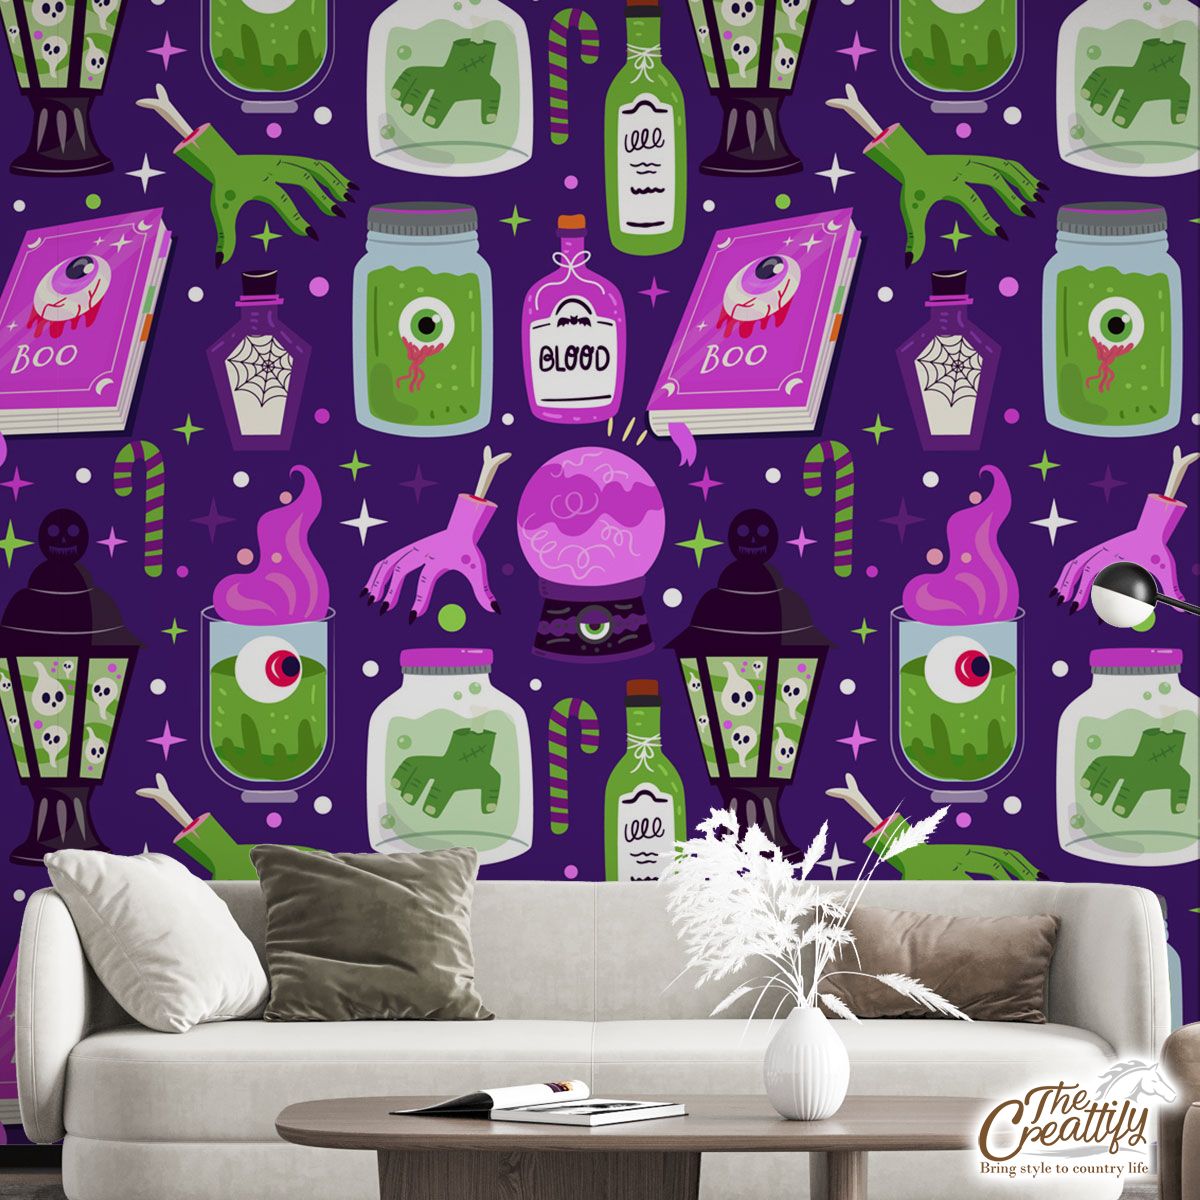 Witch Potions, Creepy Hand, Blood, Wicked Witches Dark Halloween Wall Mural